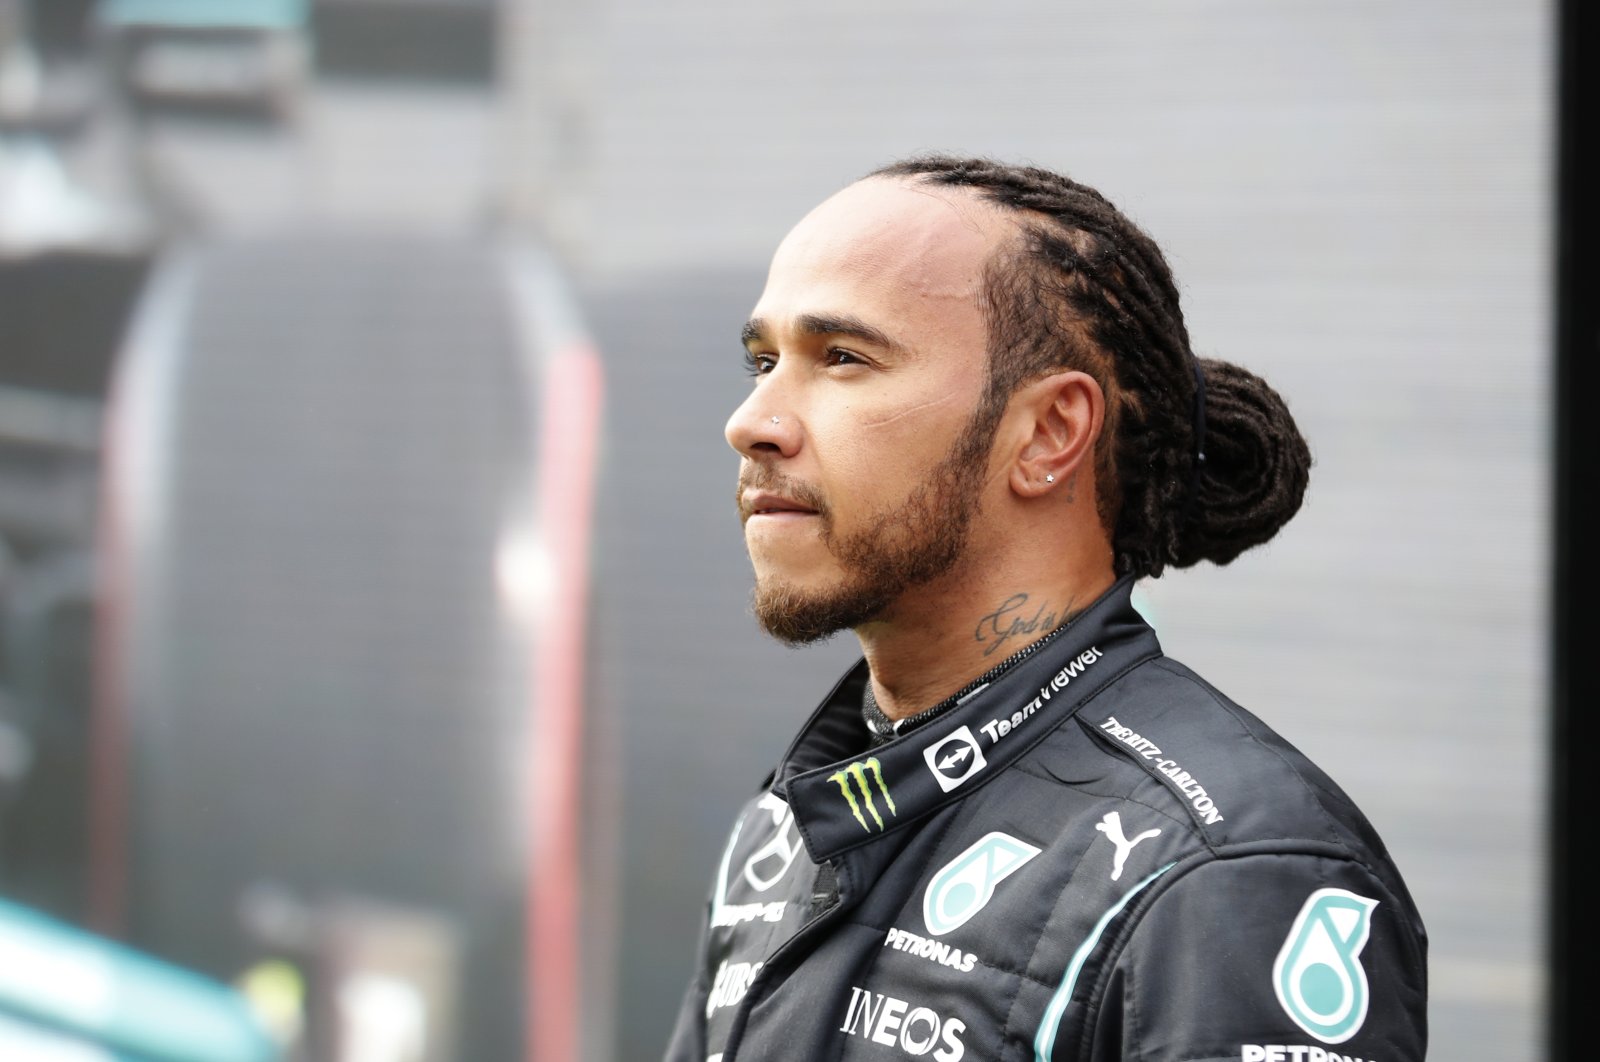 Mercedes driver Lewis Hamilton reacts to the crowd after the end of qualifying for the Formula One Turkish Grand Prix at the Intercity Istanbul Park, Istanbul, Turkey, Oct. 9, 2021. (AP Photo)